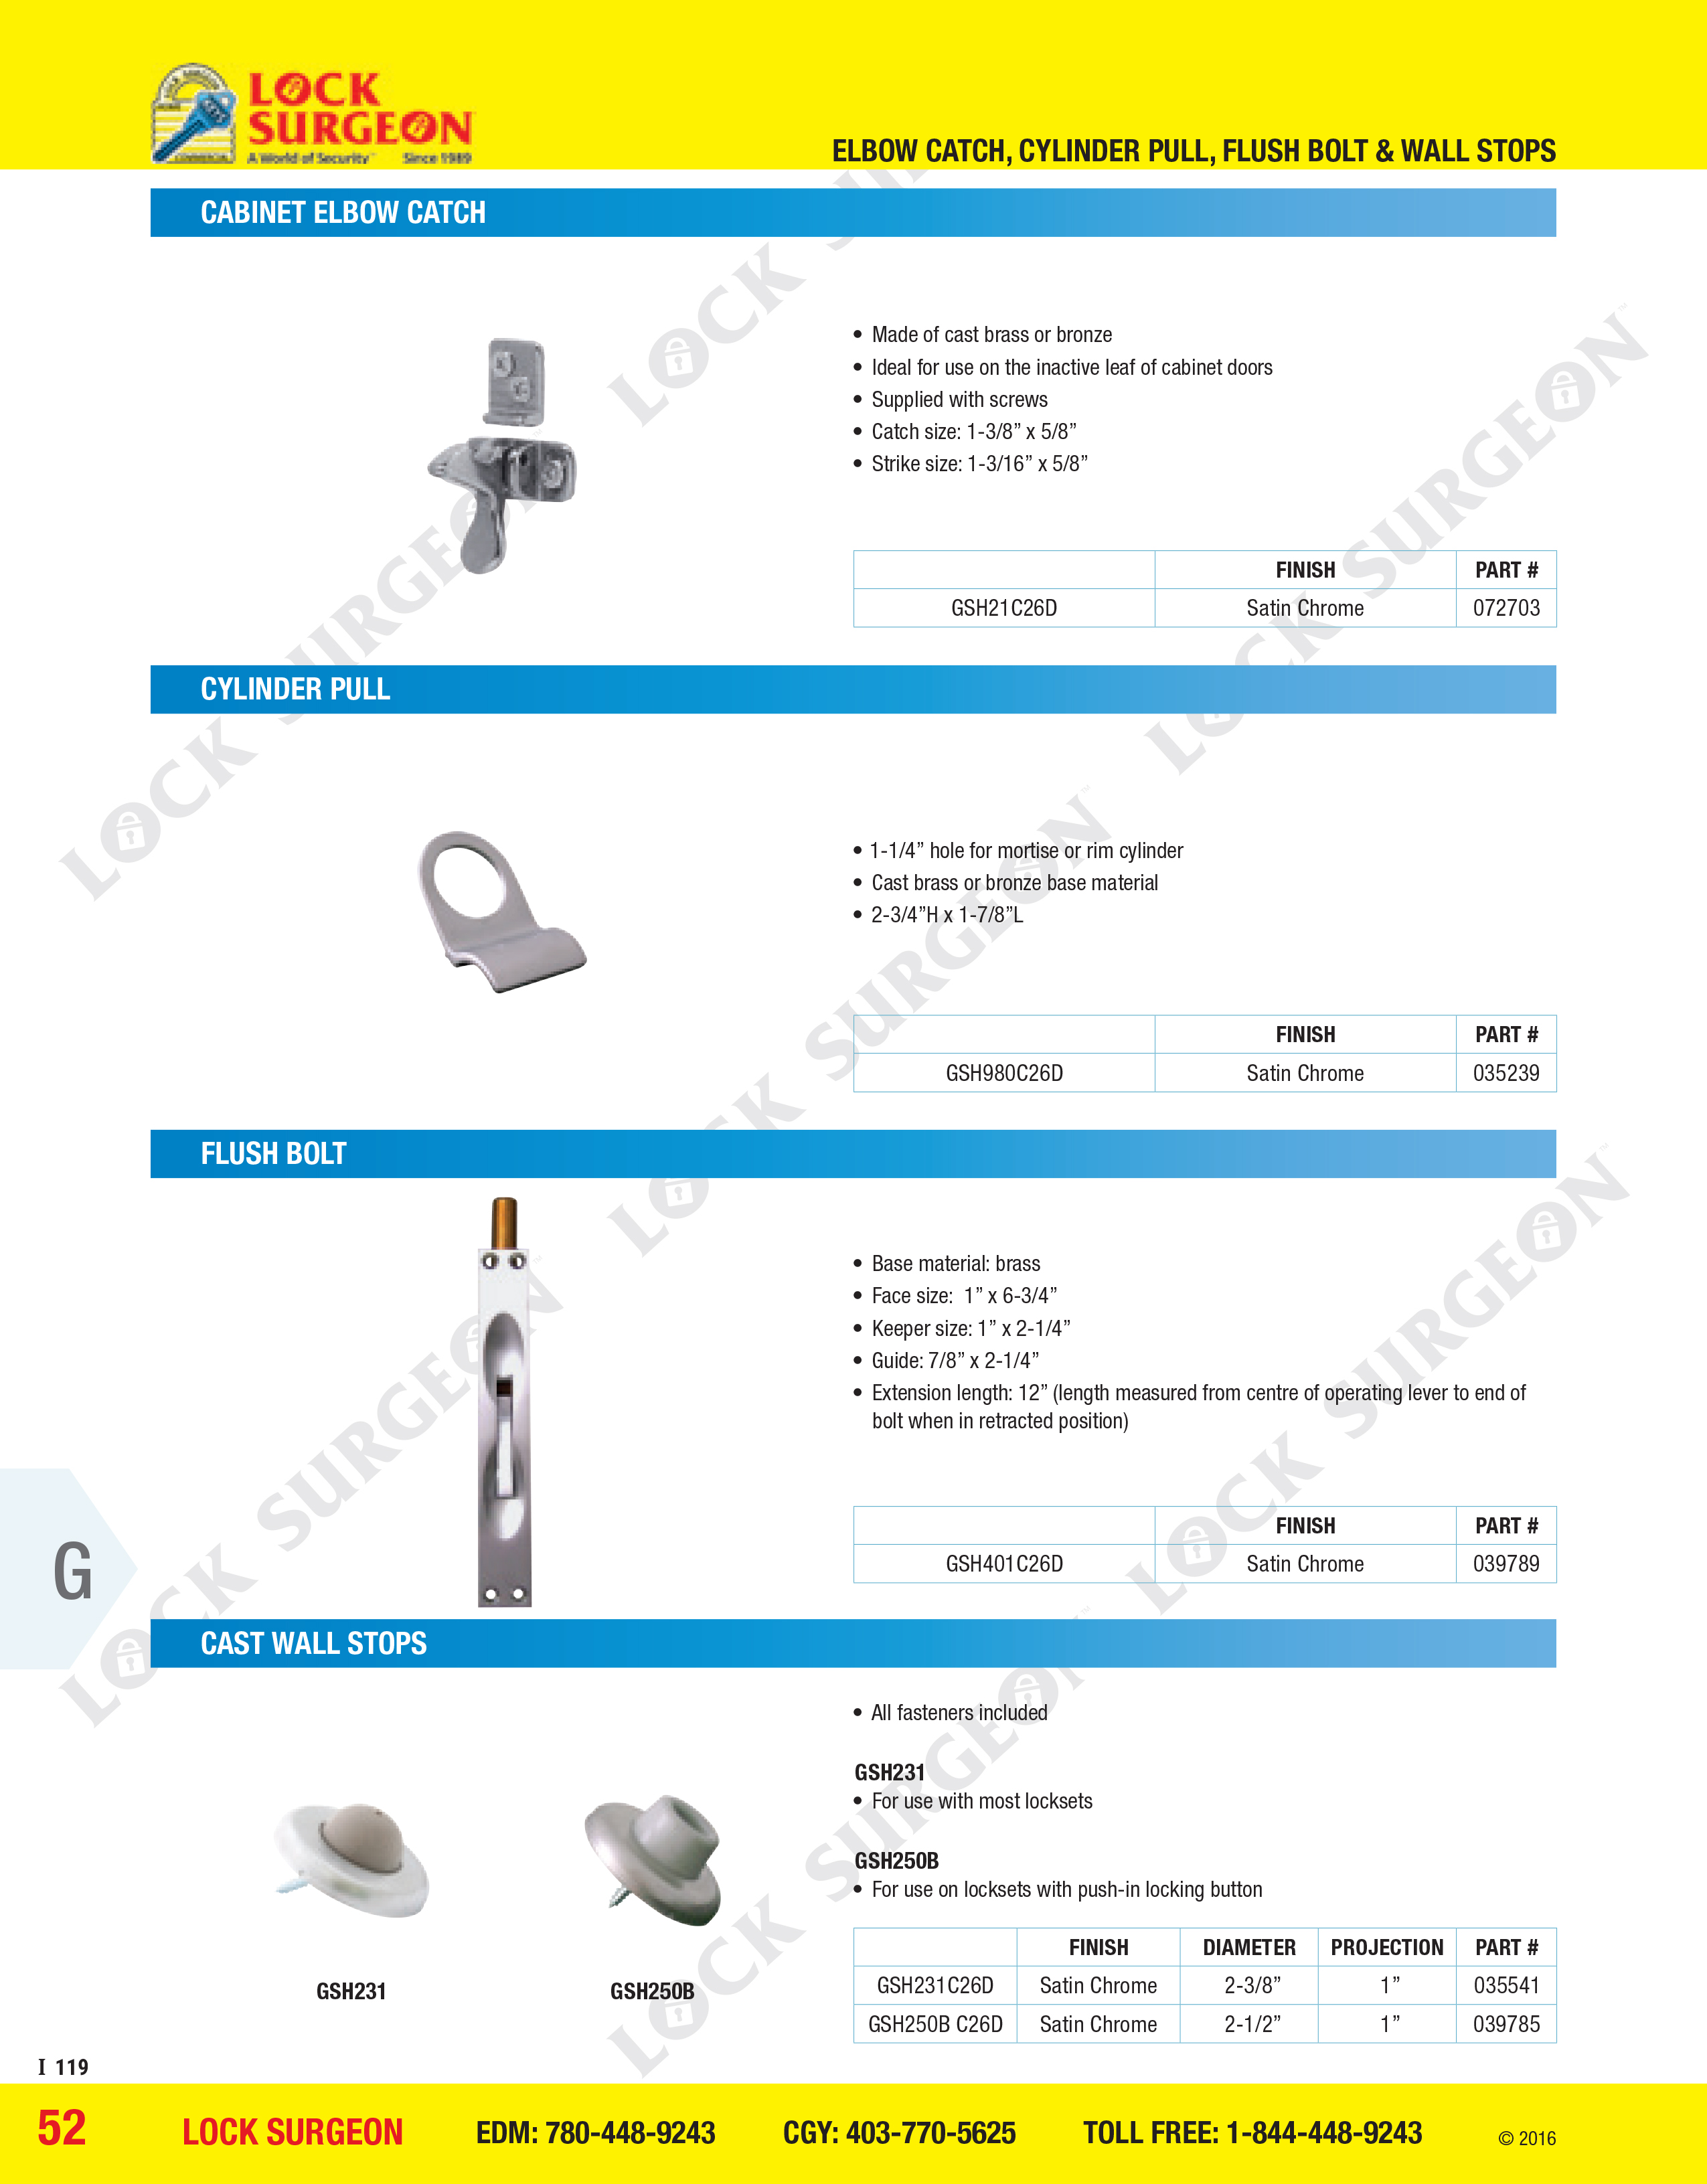 Cabinet elbow catch, cylinder pull, flush bolt and cast wall stops